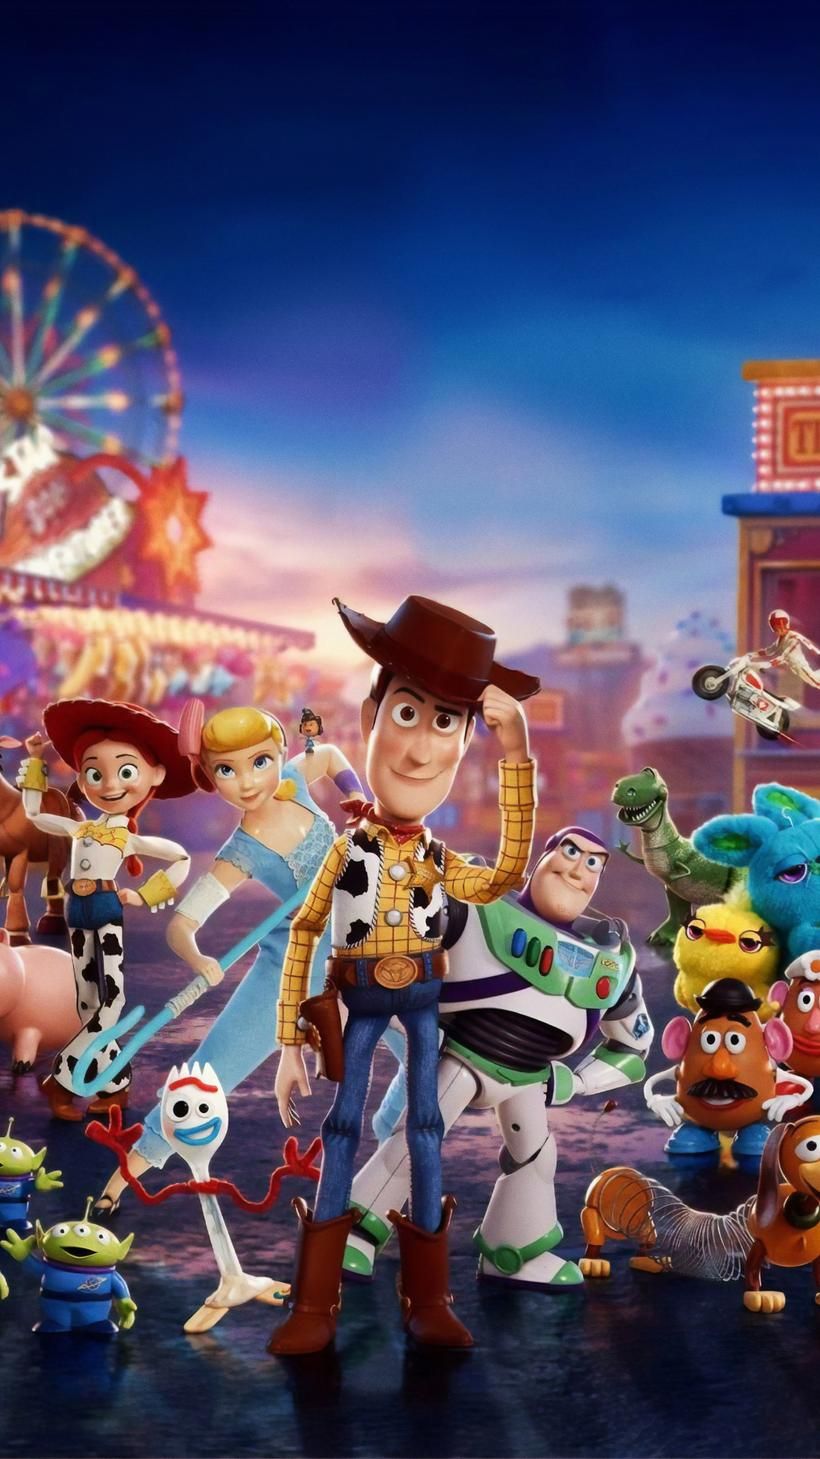 Toy Story Wallpaper Iphone - HD Wallpaper 